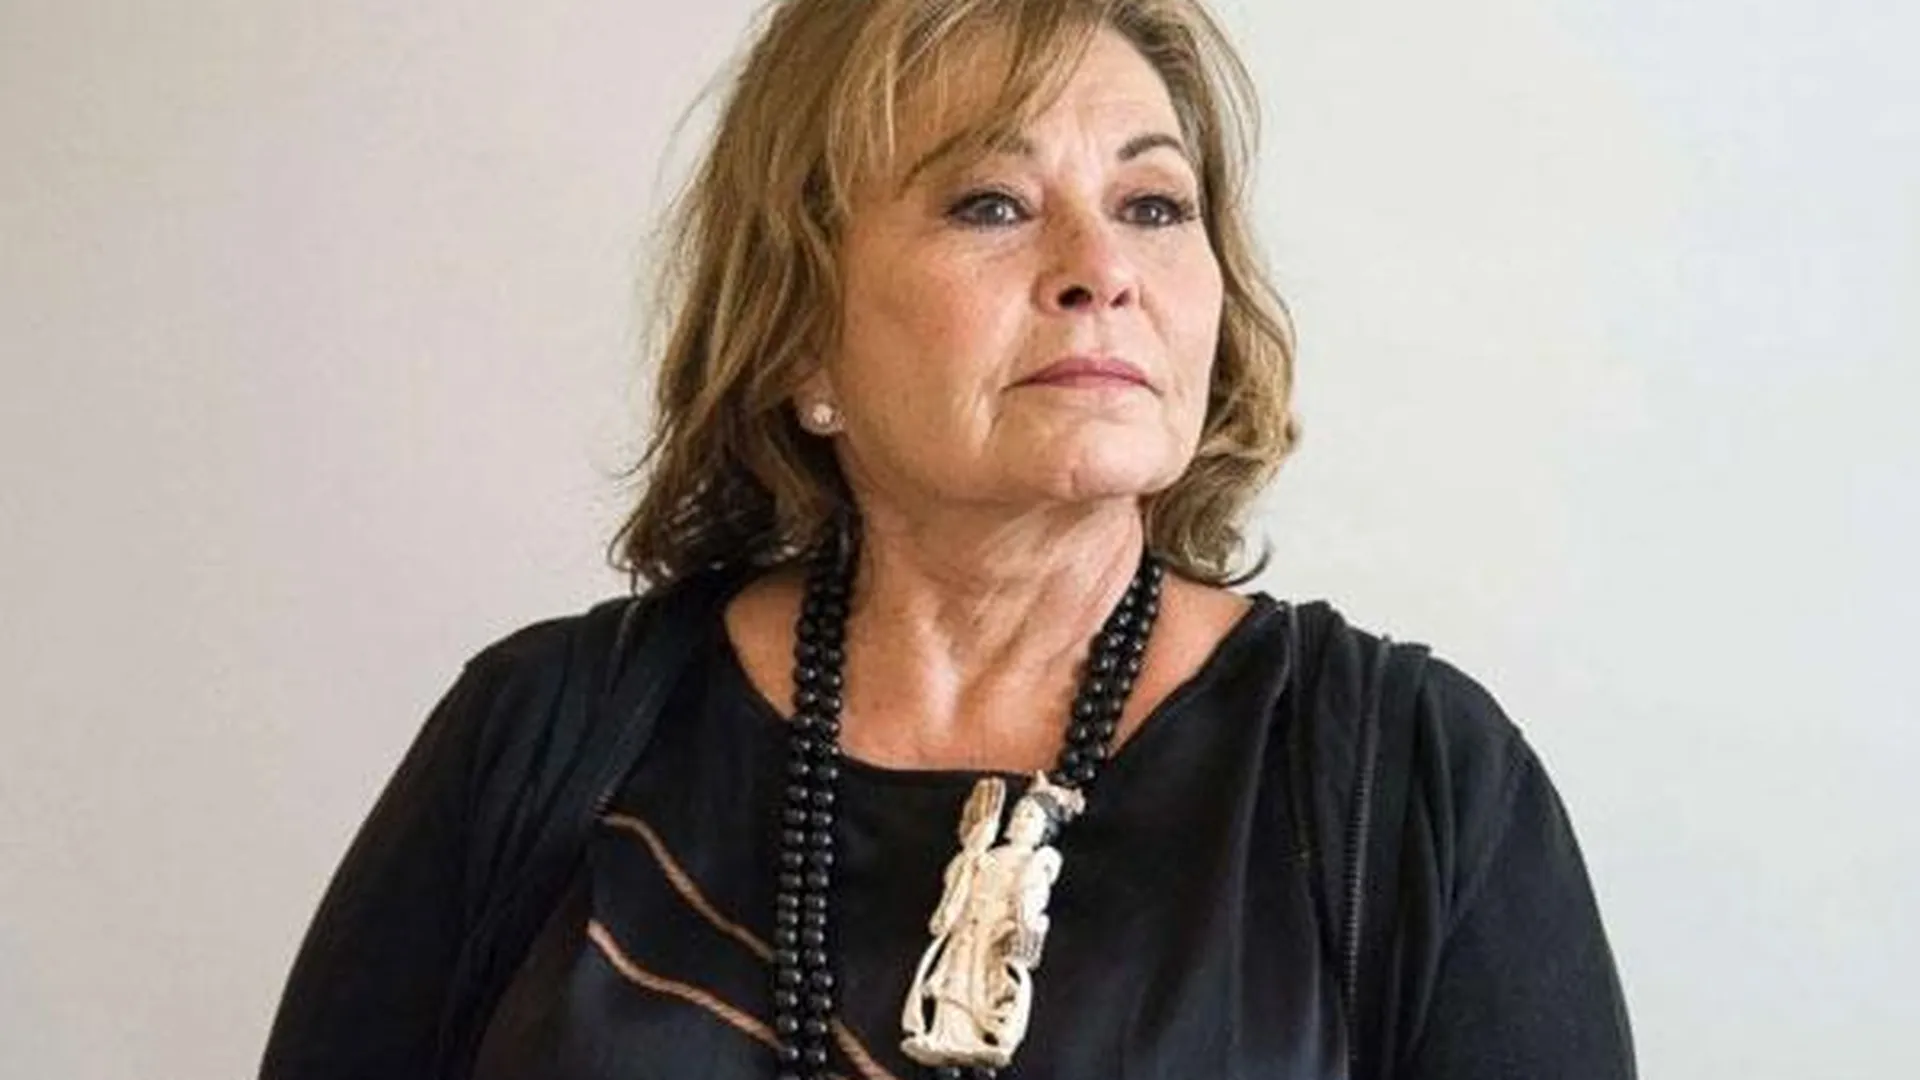 twitter.com/therealroseanne